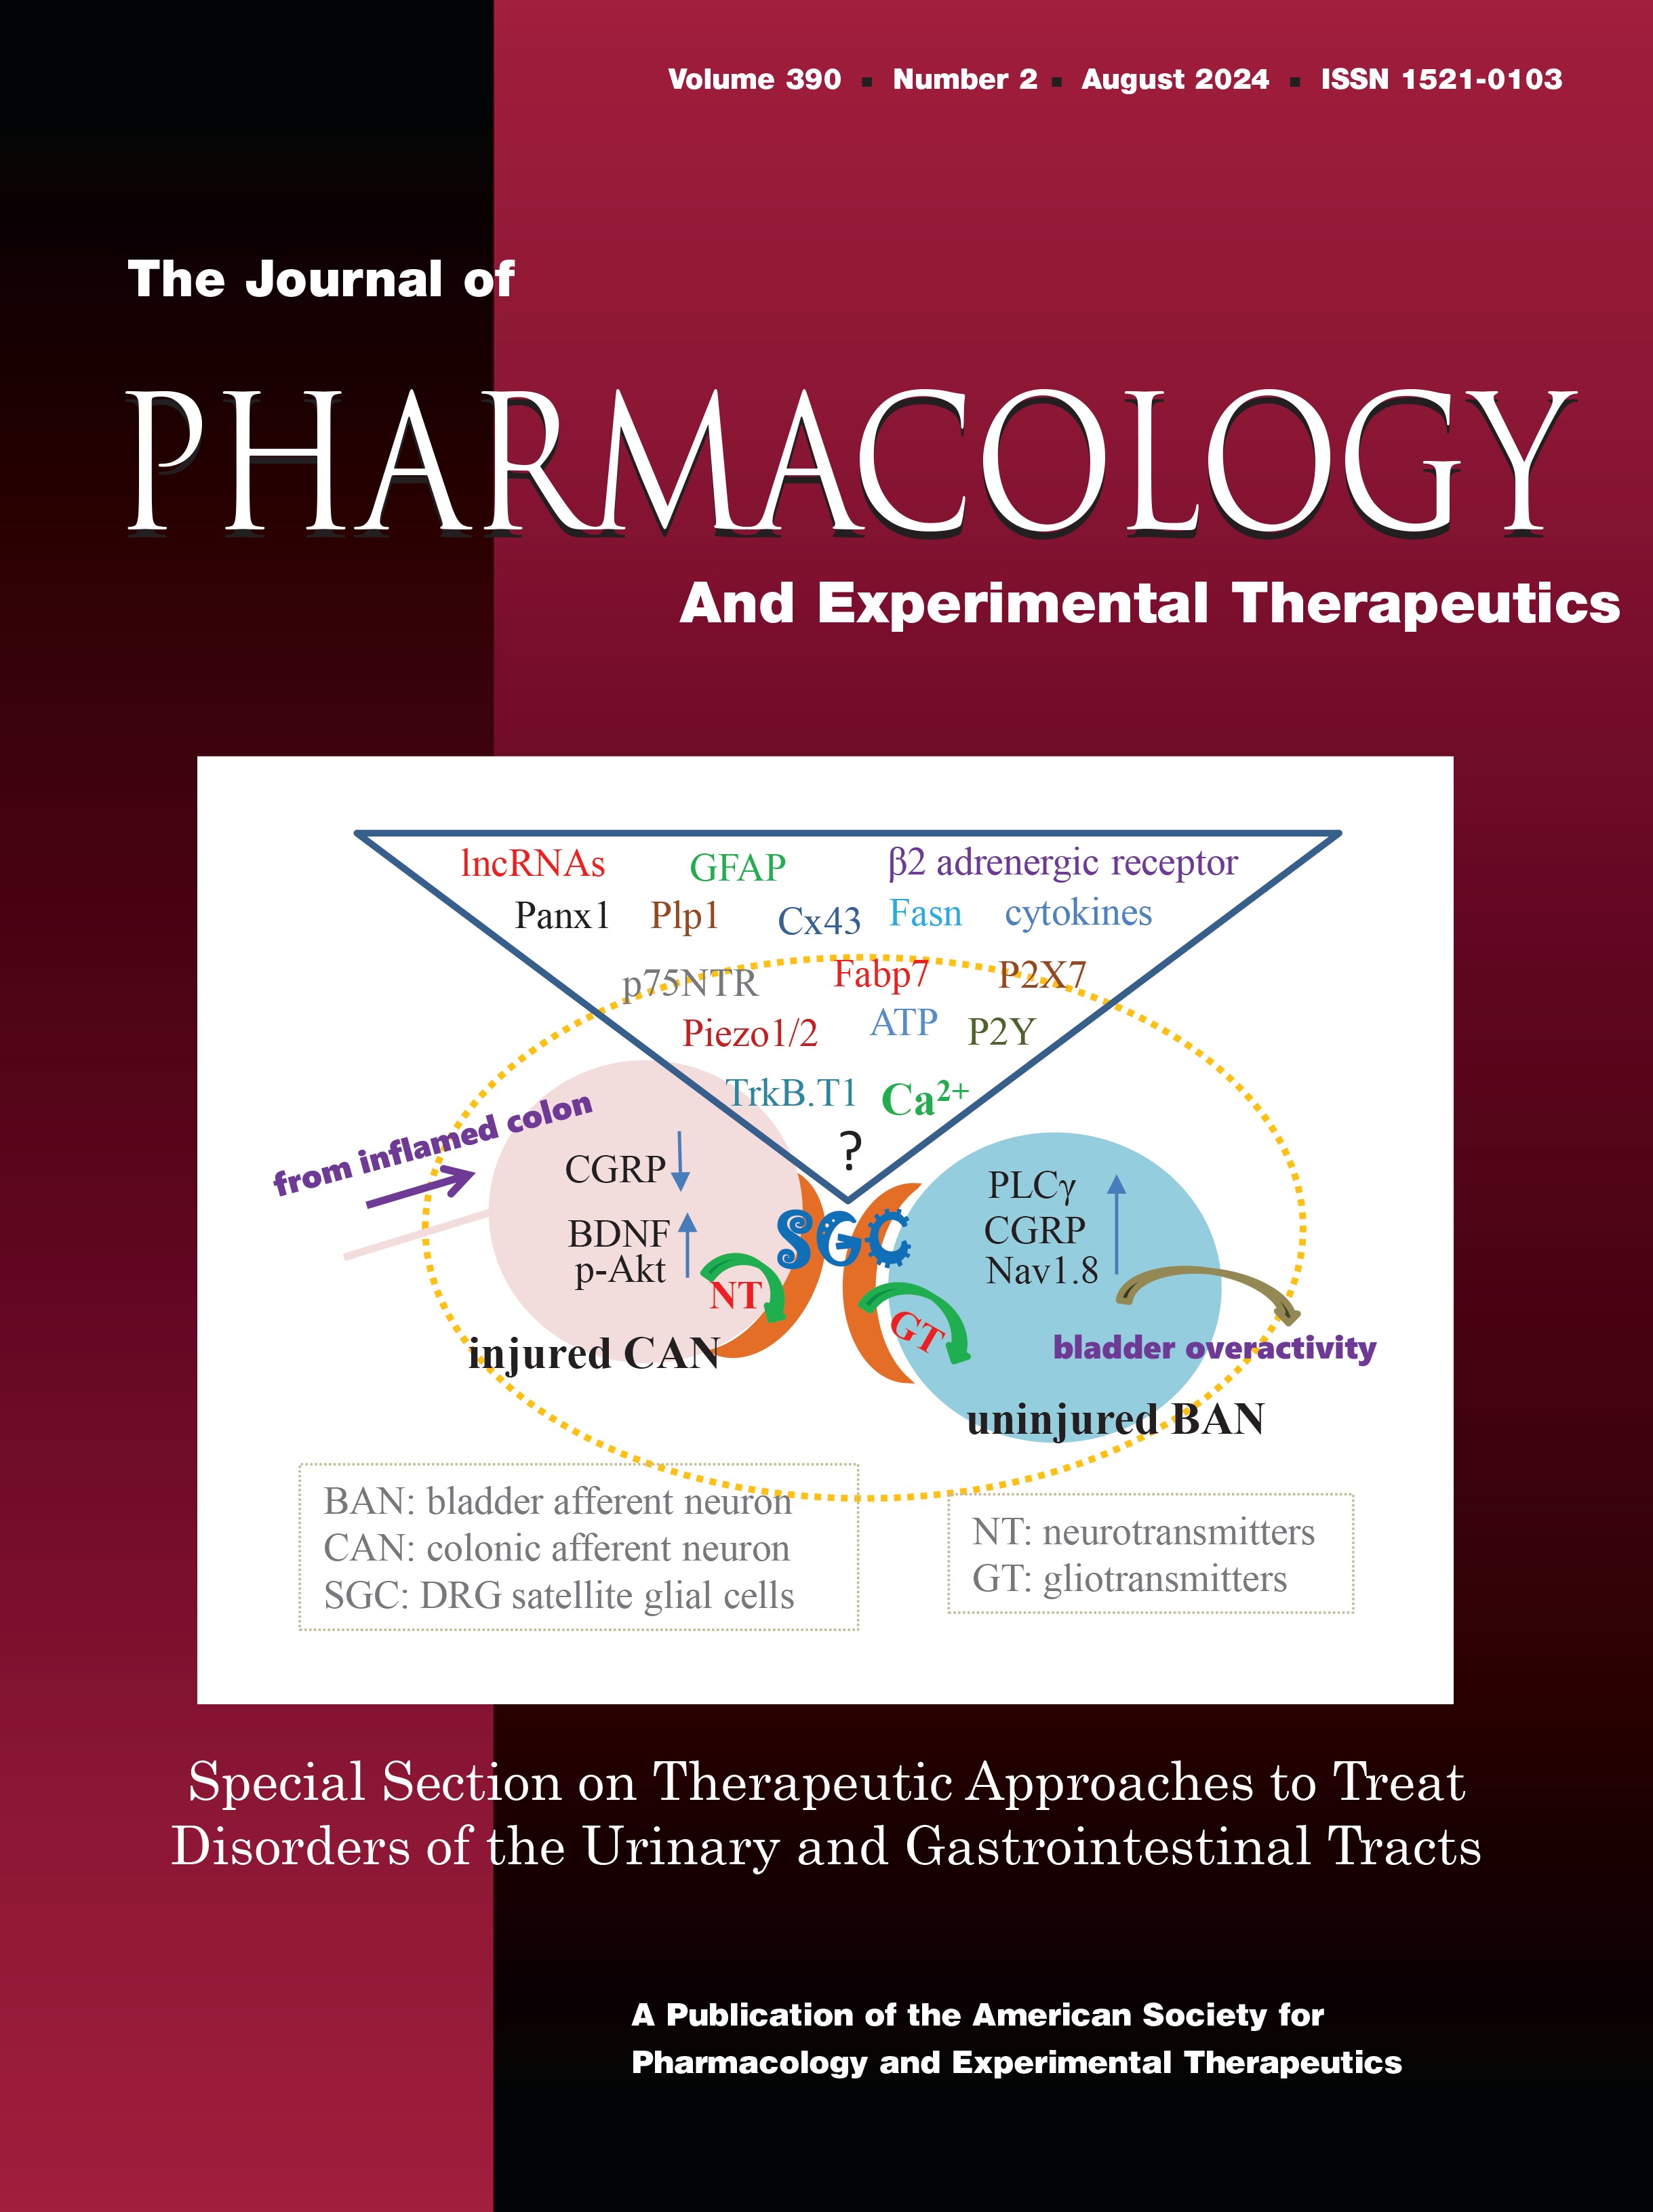 Preclinical Systemic Pharmacokinetics, Dose Proportionality, and Central Nervous System Distribution of the ATM Inhibitor WSD0628, a Novel Radiosensitizer for the Treatment of Brain Tumors [Metabolism, Transport, and Pharmacogenetics]